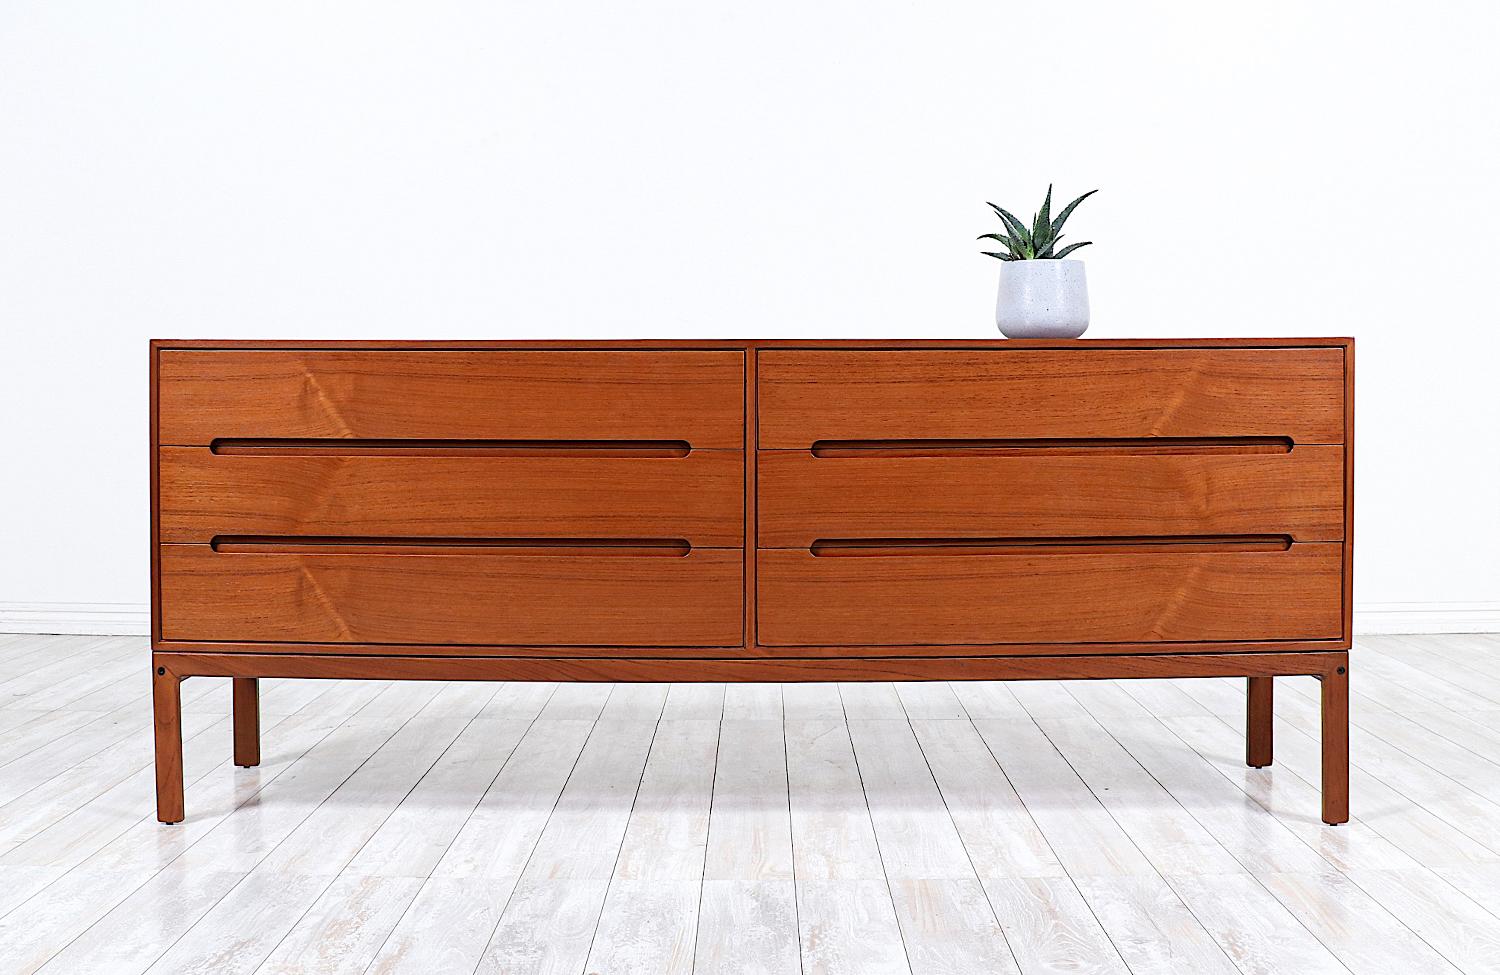 Elegant modern dresser designed by Arne Wahl Iversenand for Vinde Møbelfabrik in Denmark circa 1950s. This Danish Modern teak dresser features six drawers with dovetailed joinery and carved pulls showcasing impeccable craftsmanship, bringing a